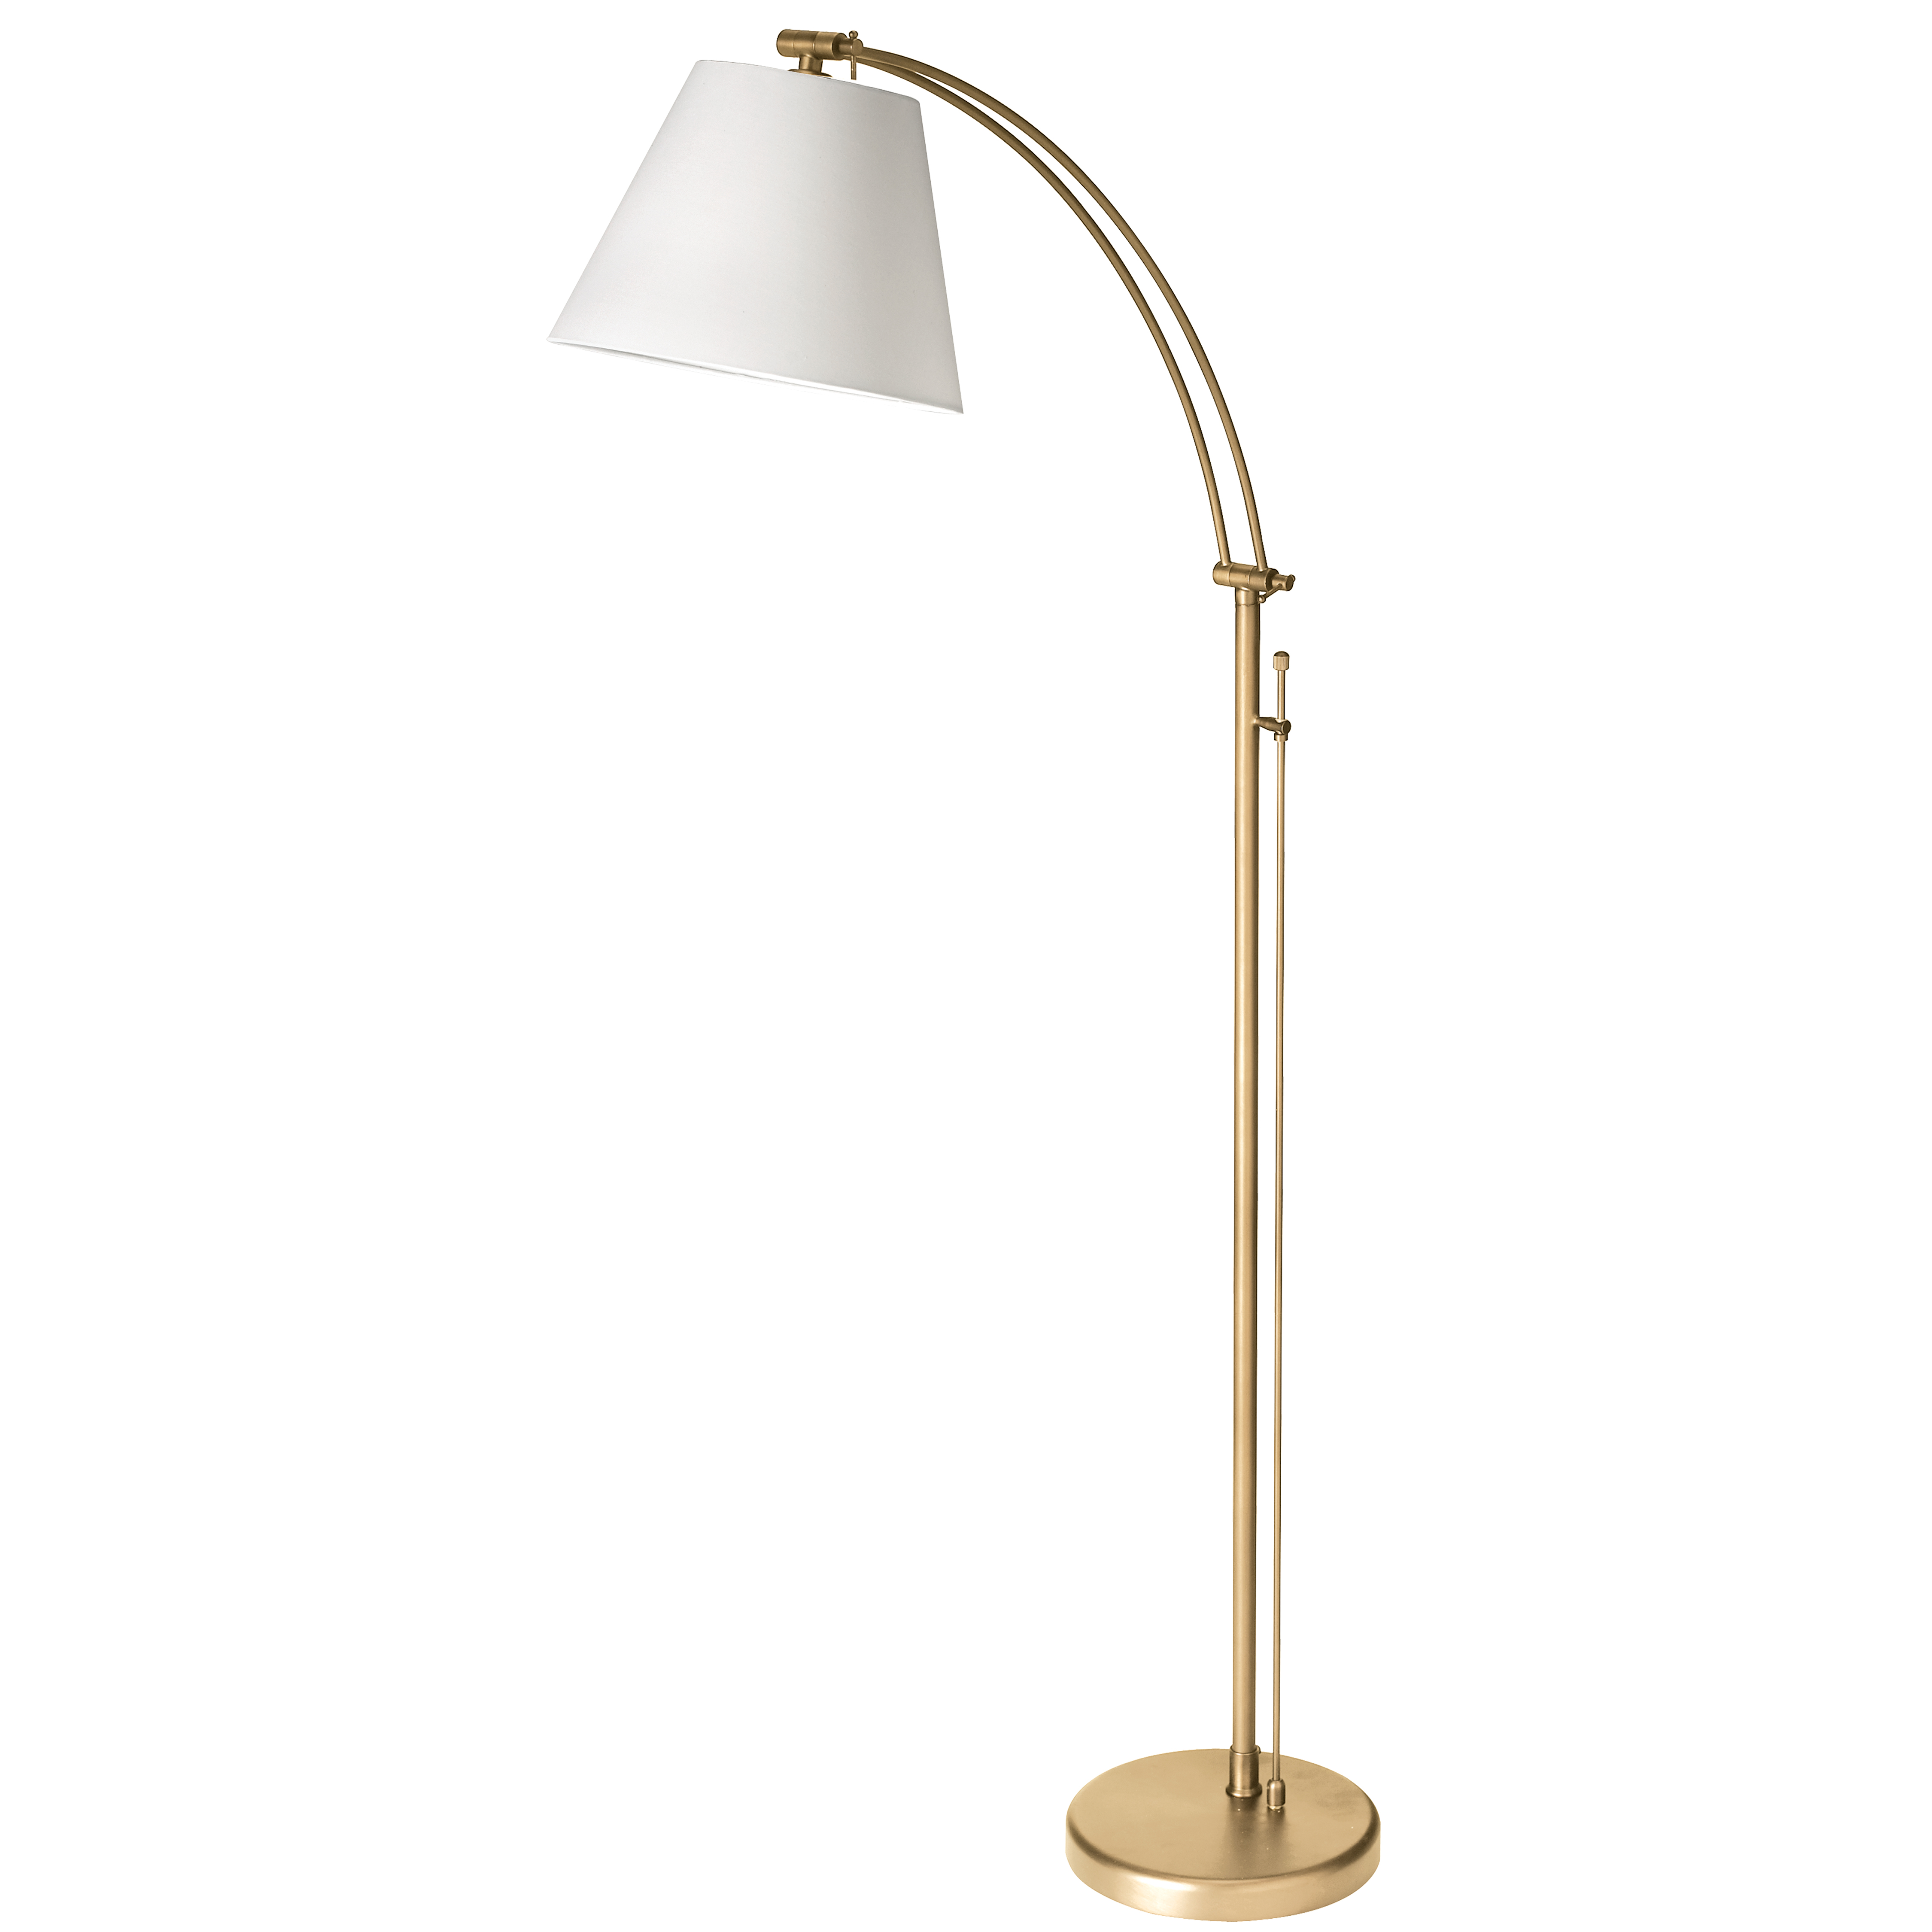 The Felix family of lighting takes a traditional floor lamp design and adds modern convenience and a stylish aesthetic. The angle of the shade can be adjusted to suit your needs. The metal frame and base in your choice of finish incorporates a straight rod that divides in two, with adjustable arms that arc out to the fabric shade. An empire shade completes the fashionable silhouette. With its practical features and clean modern style, Felix lighting is a welcome addition to your living room, bedroom or office space.